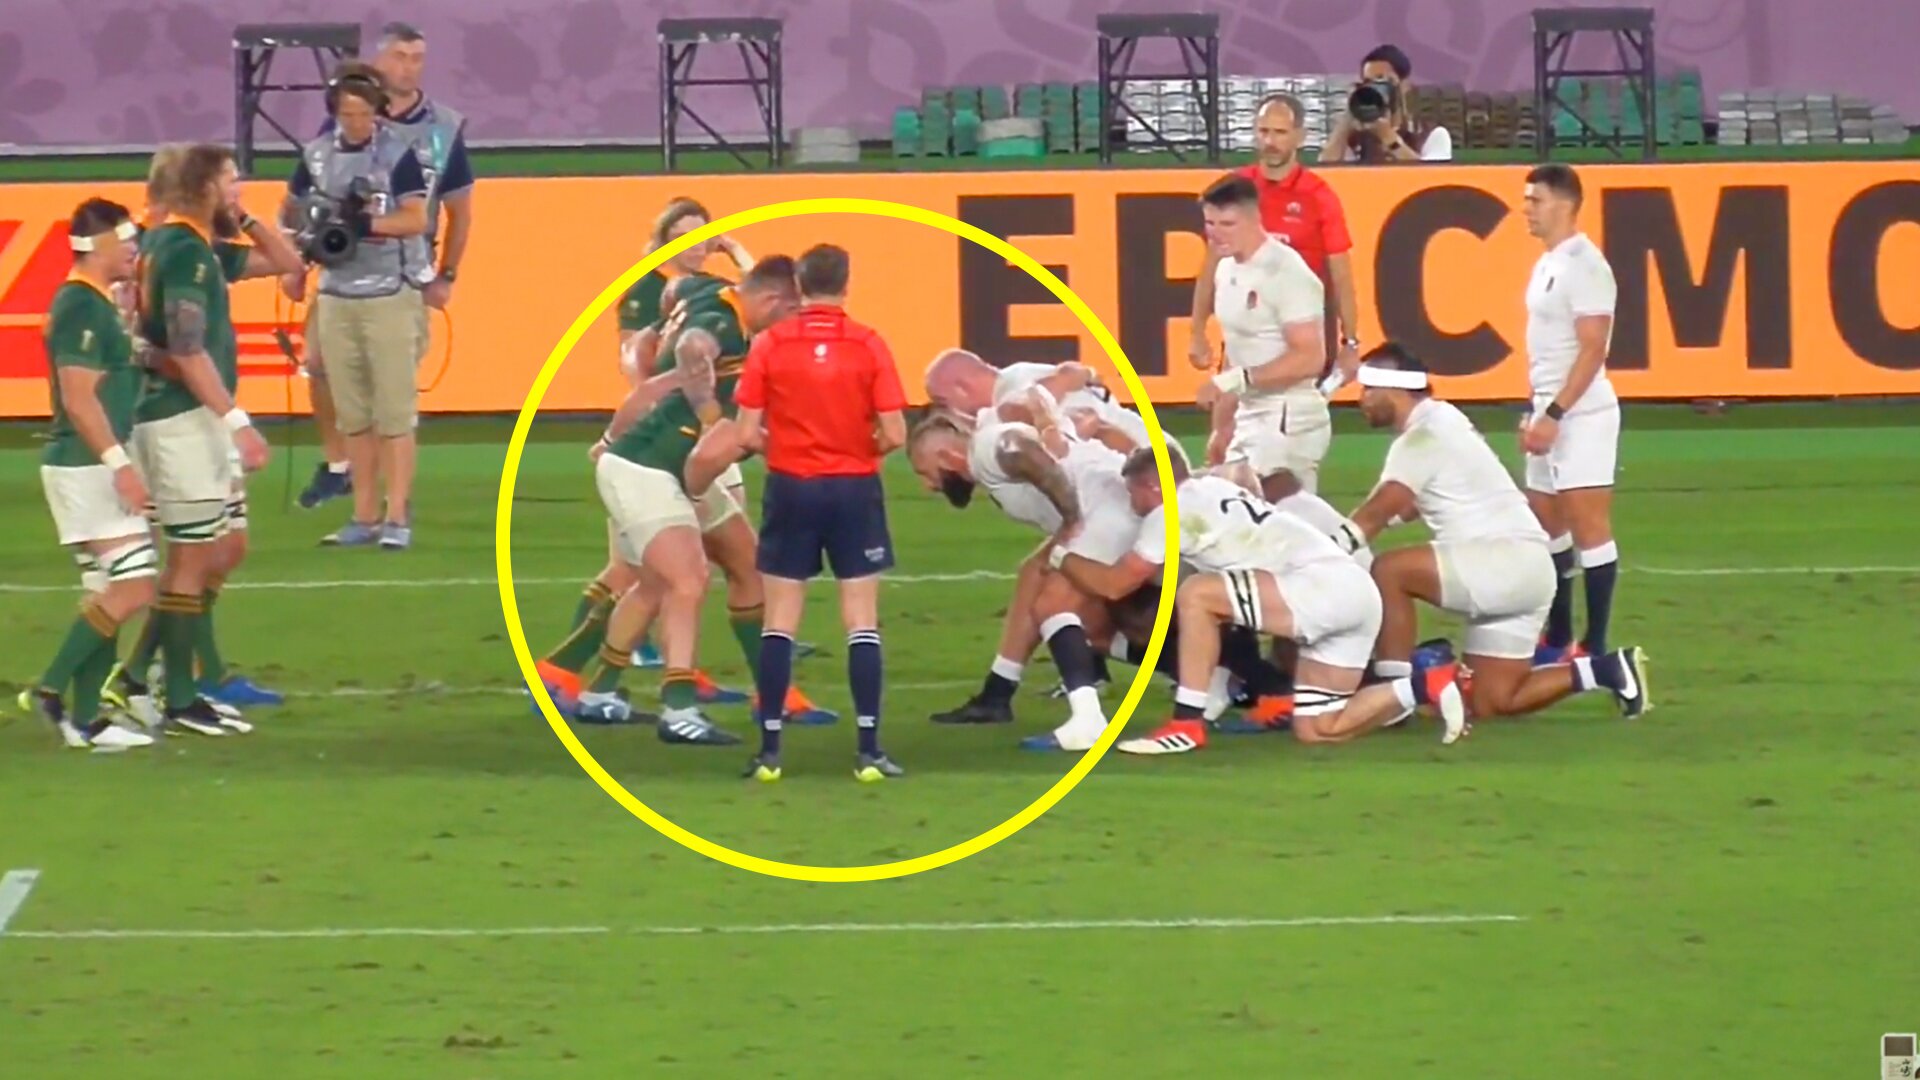 Mounting calls for South Africa to be stripped of World Cup win after undeniable evidence emerges showing officials helping Springboks